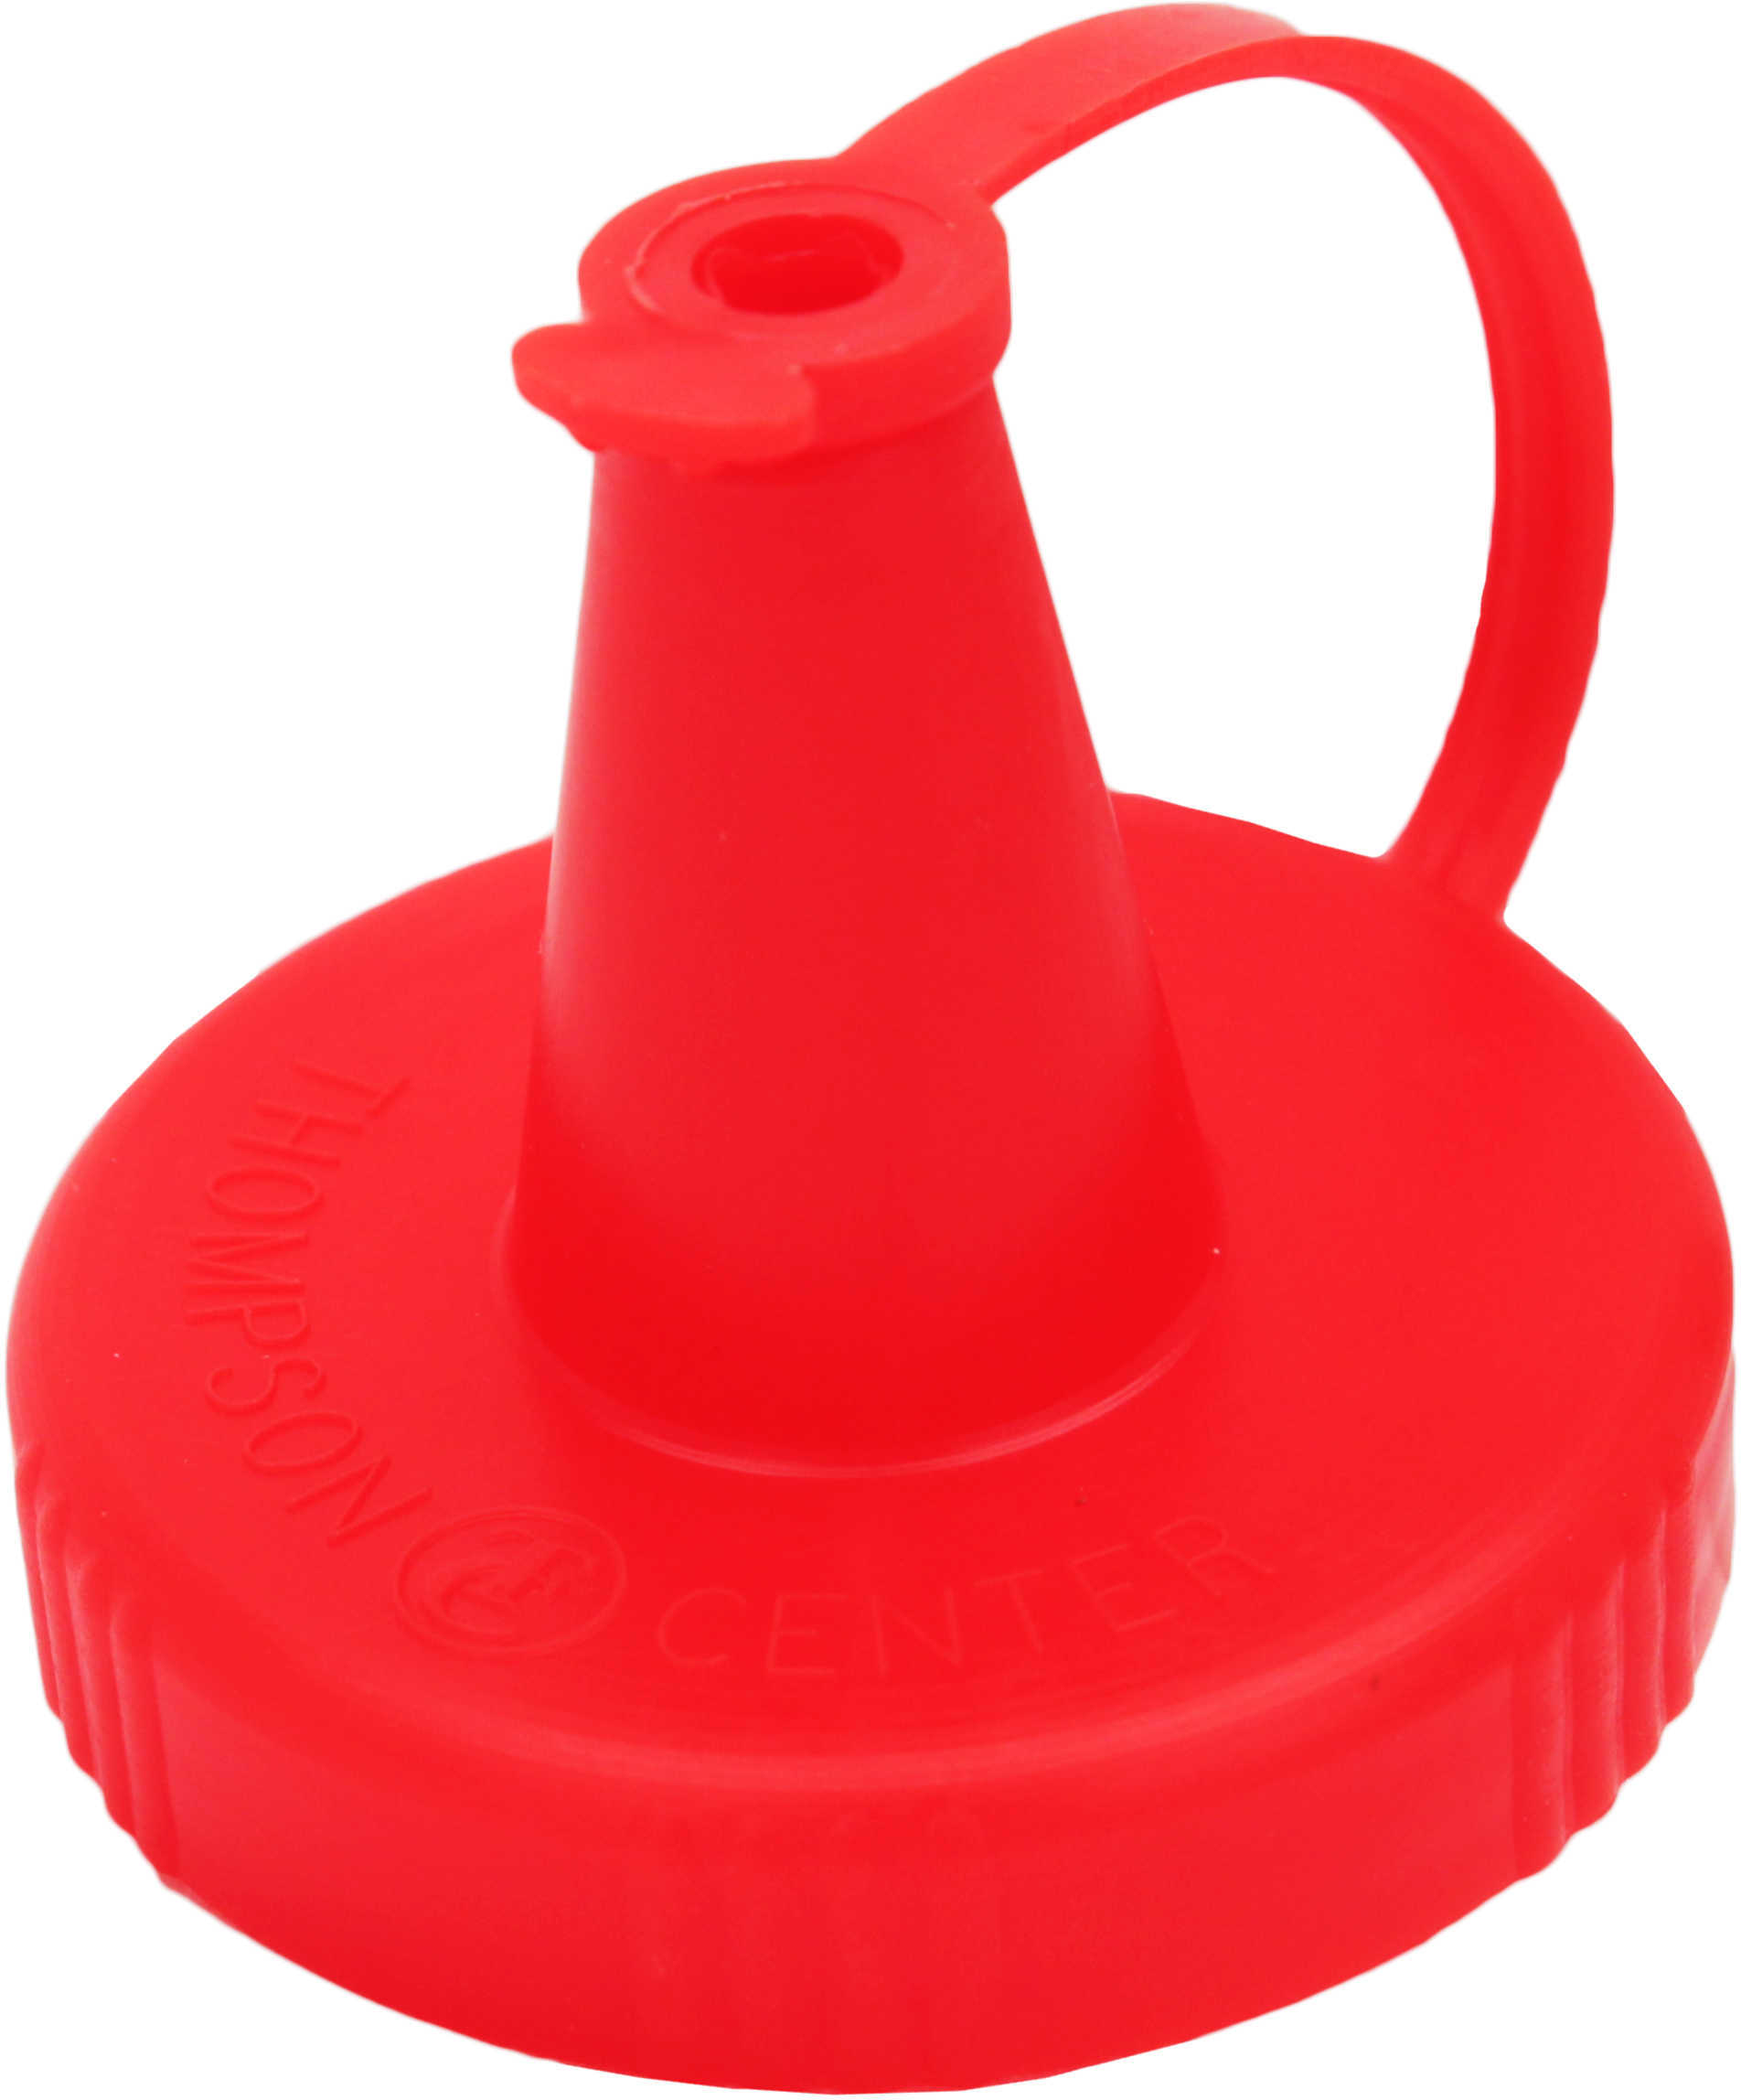 T/C Accessories 31007223 Pyrodex Powder Spout Muzzleloader Red